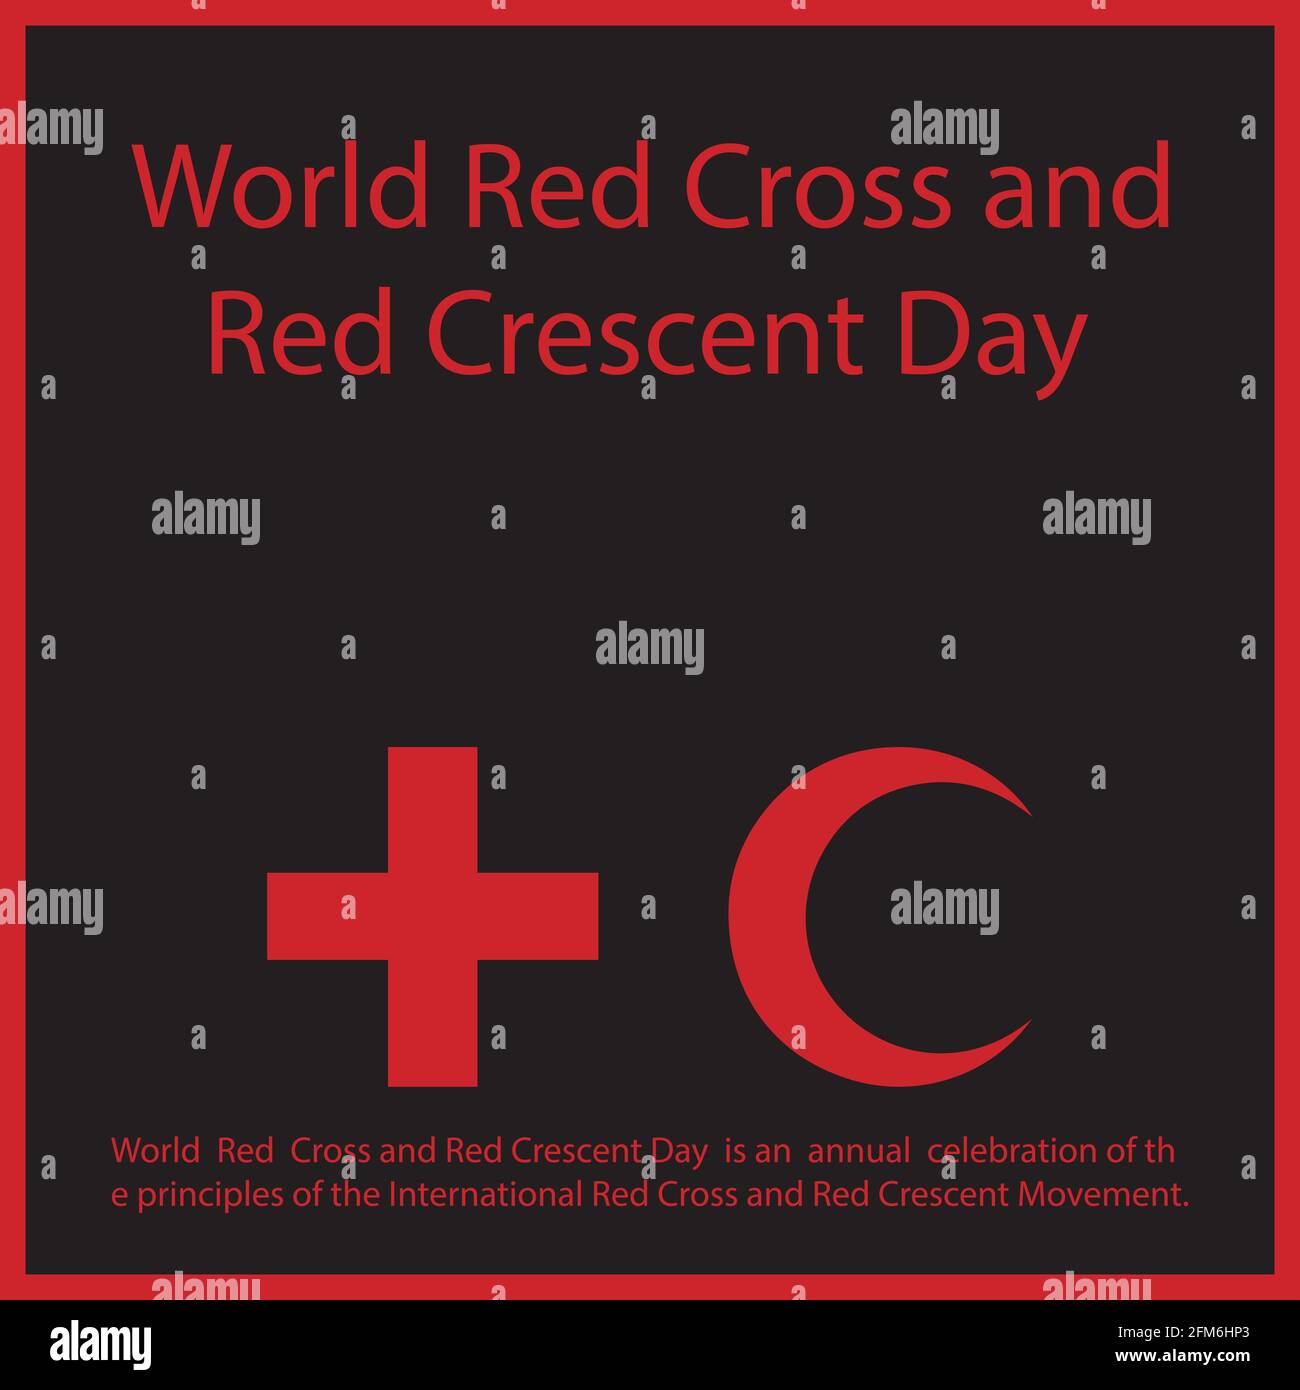 World Red Cross and Red Crescent Day is an annual celebration of the principles of the International Red Cross and Red Crescent Movement. Stock Vector